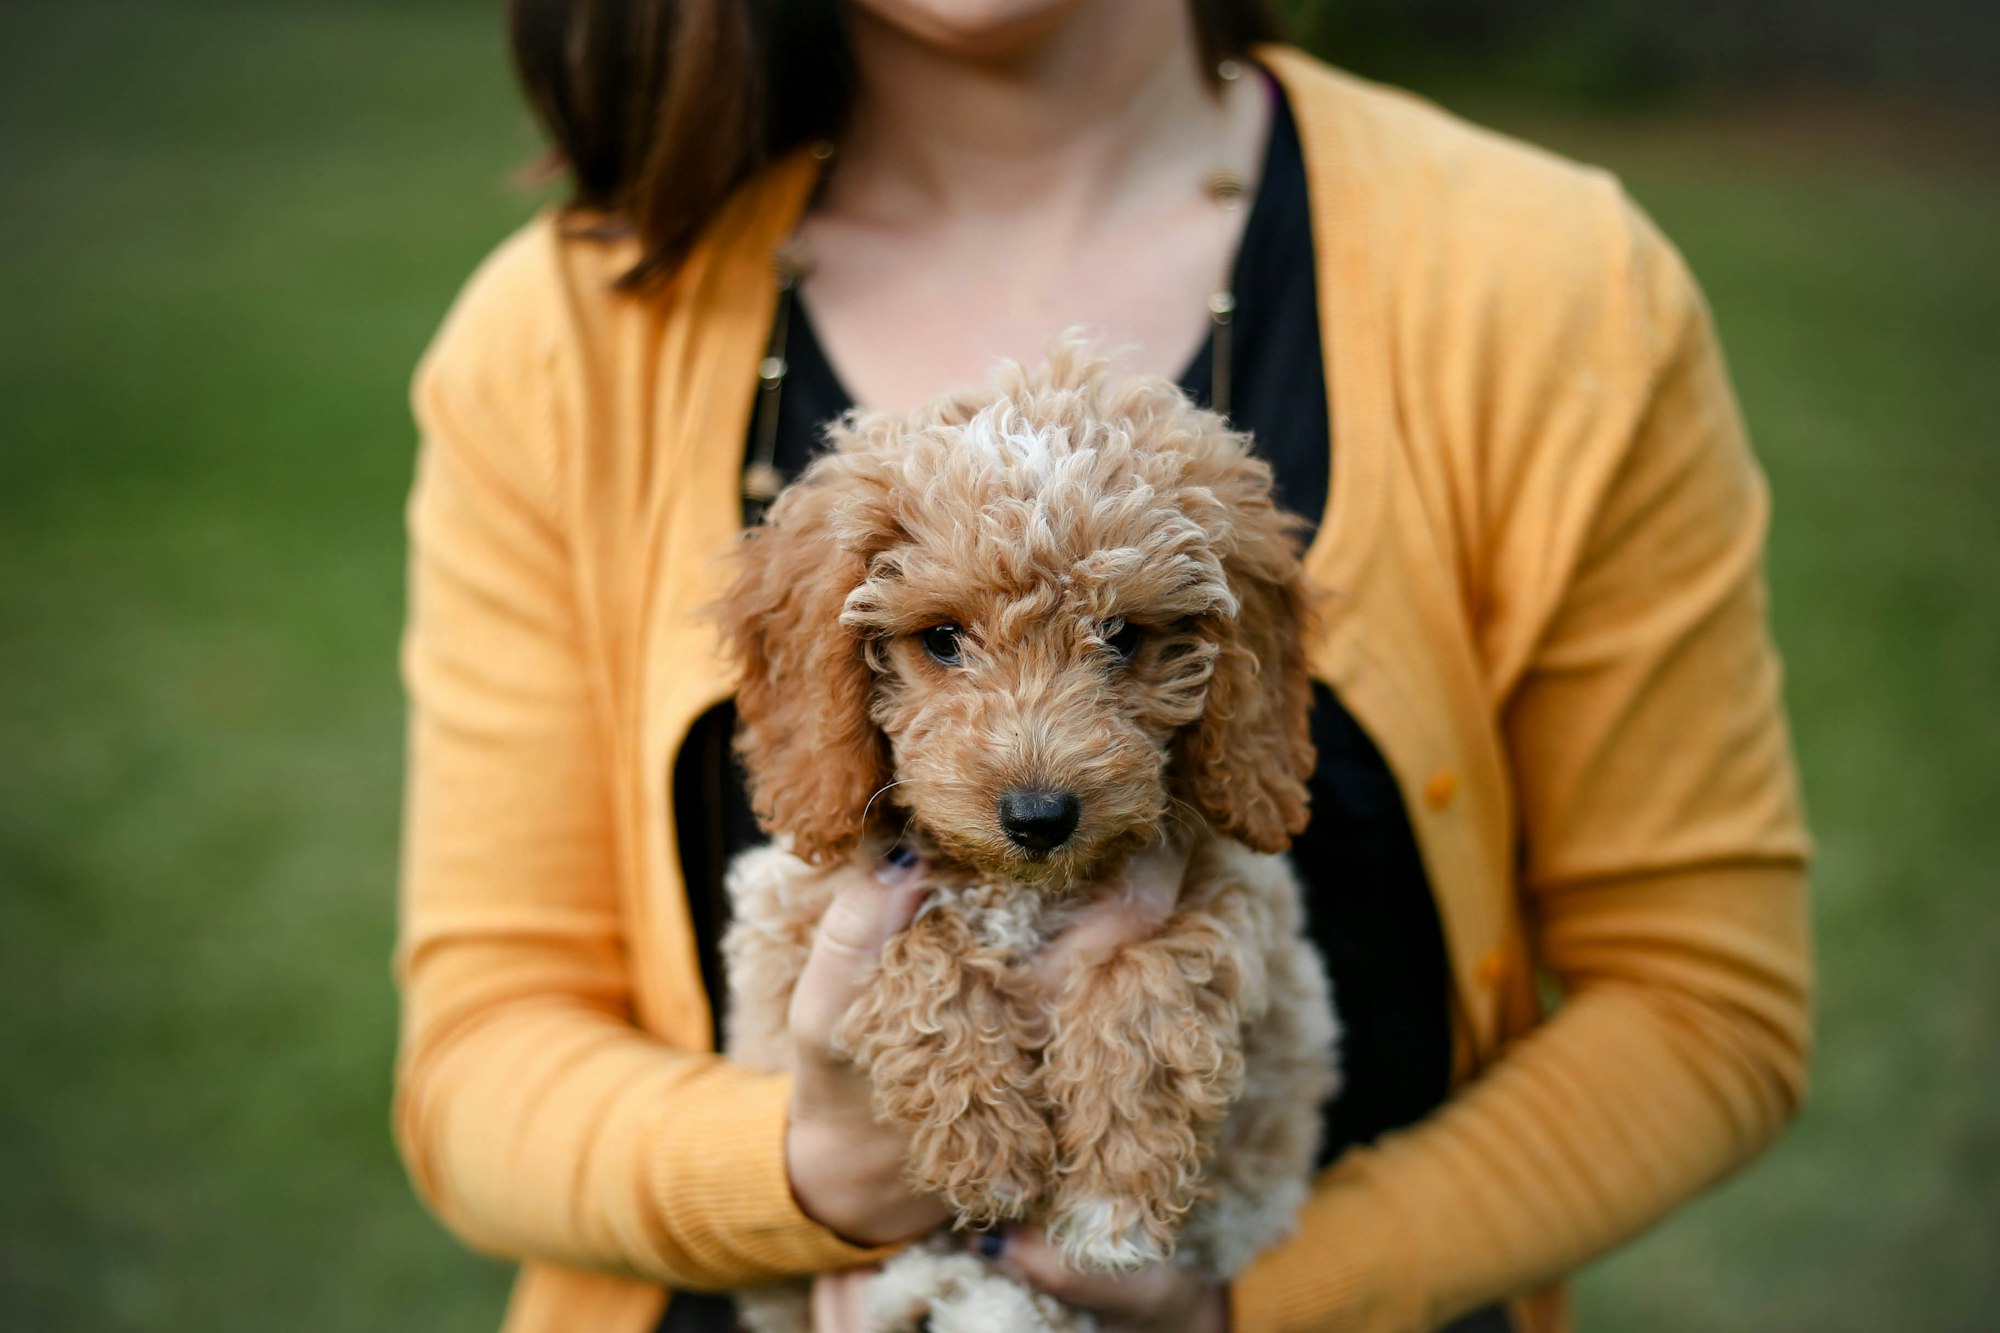 Golden Doodle Tested Toys - The Best Toys for Mini Goldendoodles